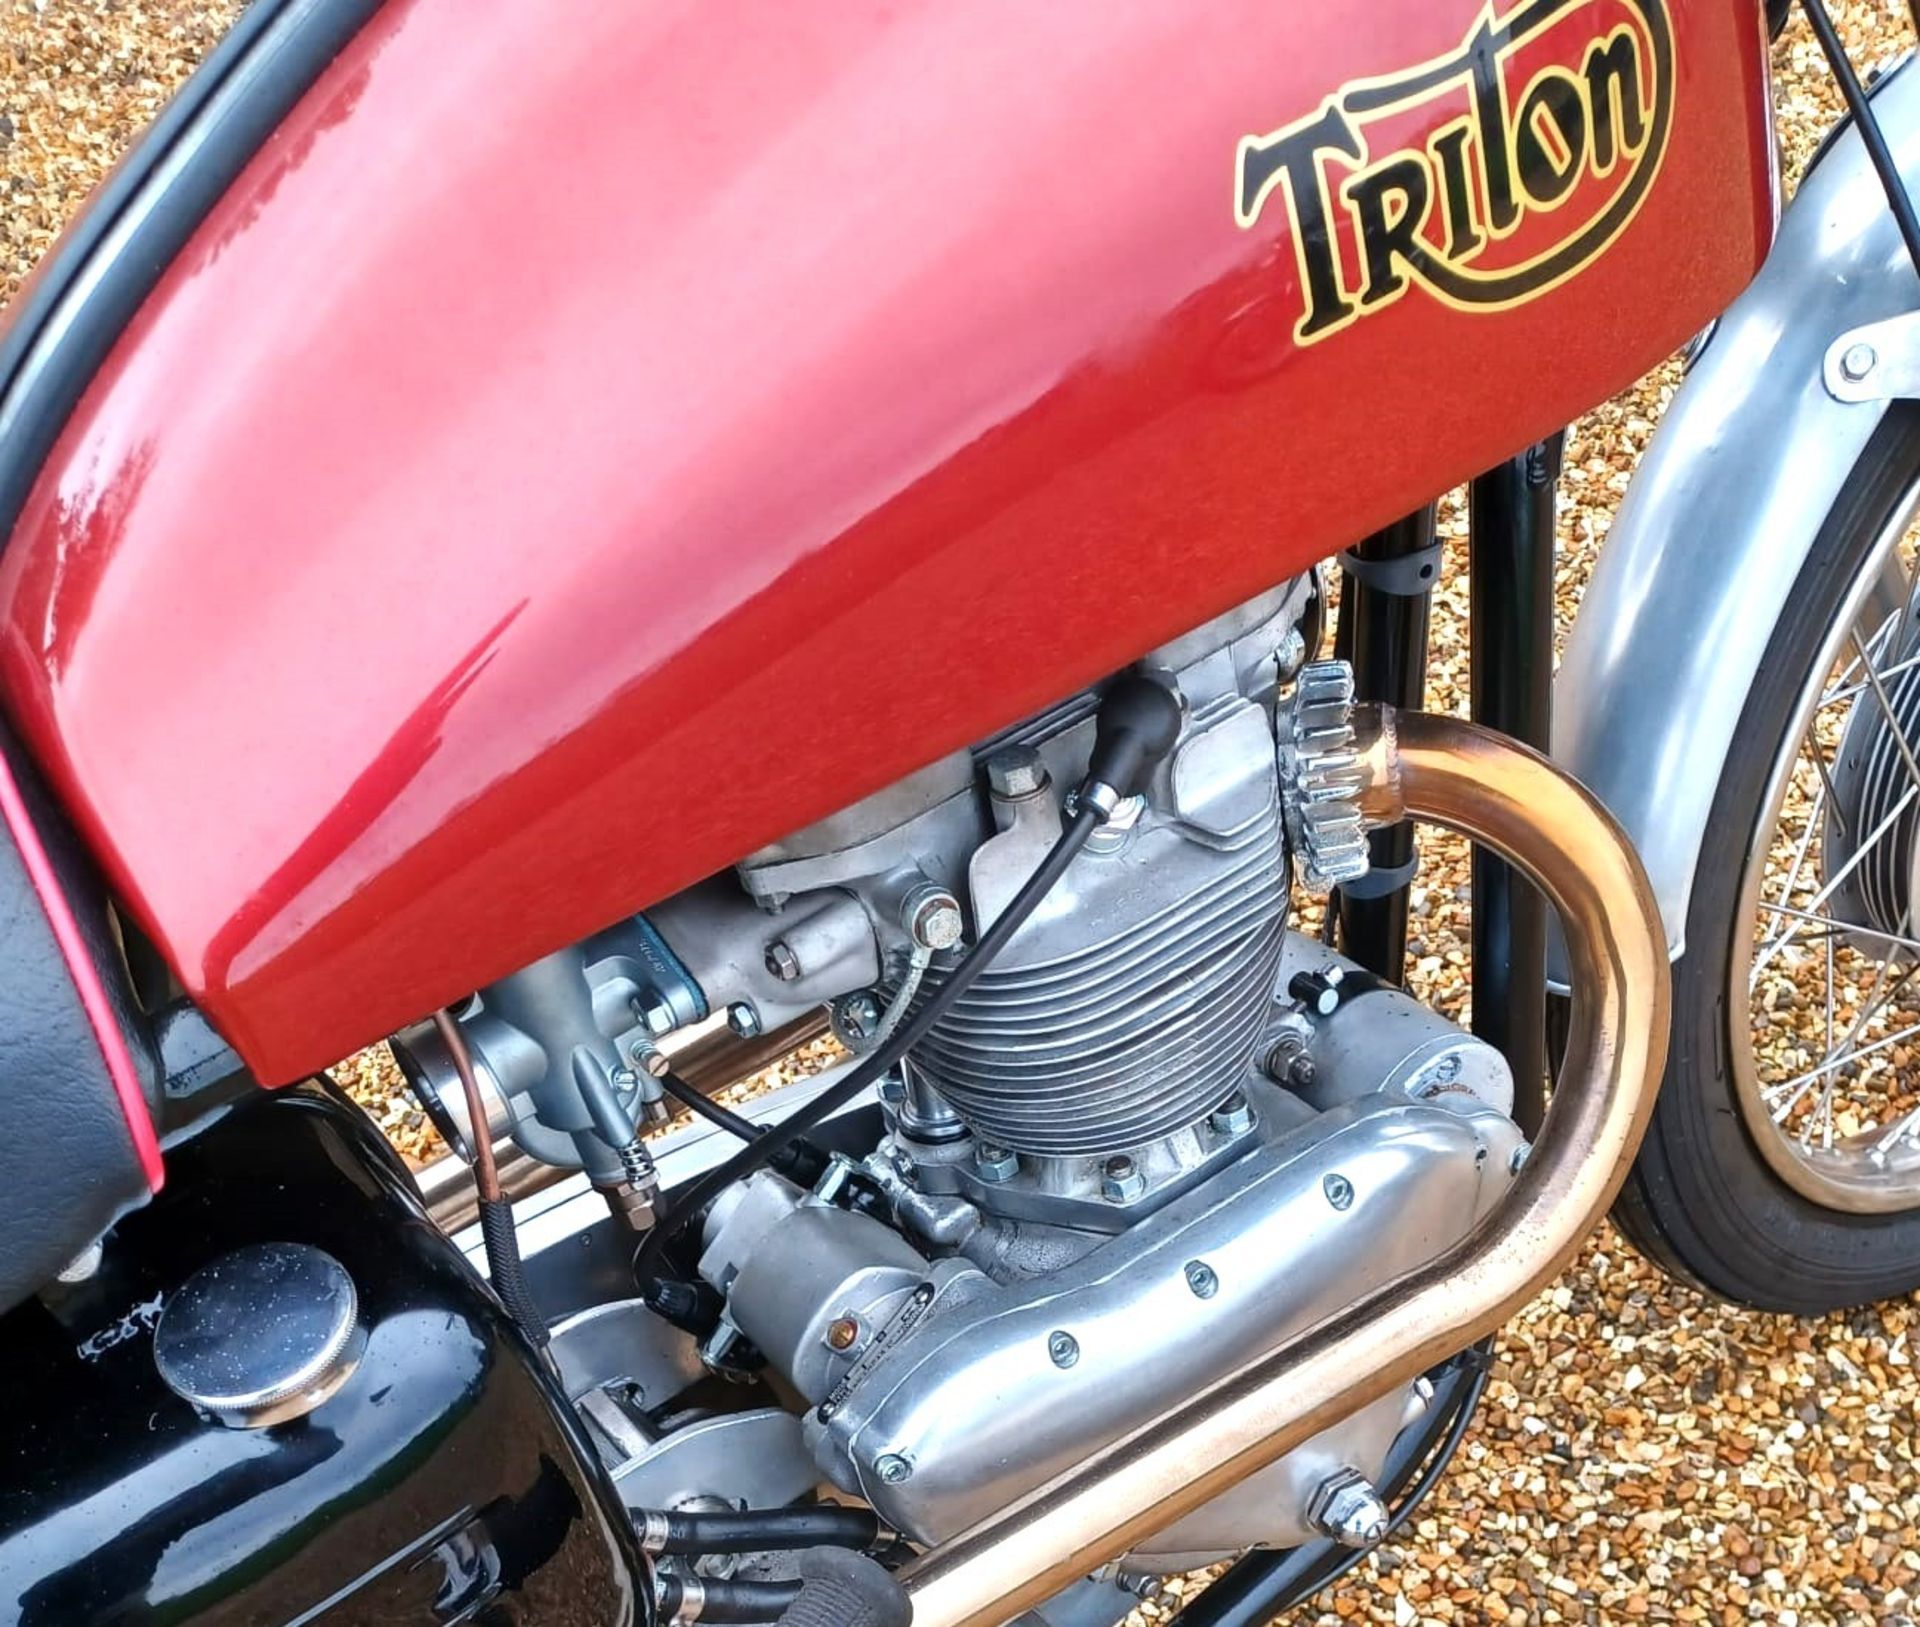 1969 TRITON 500cc Registration Number: WHW 241H Frame Number: TBA Recorded Mileage: 1658 - Subject - Image 4 of 14